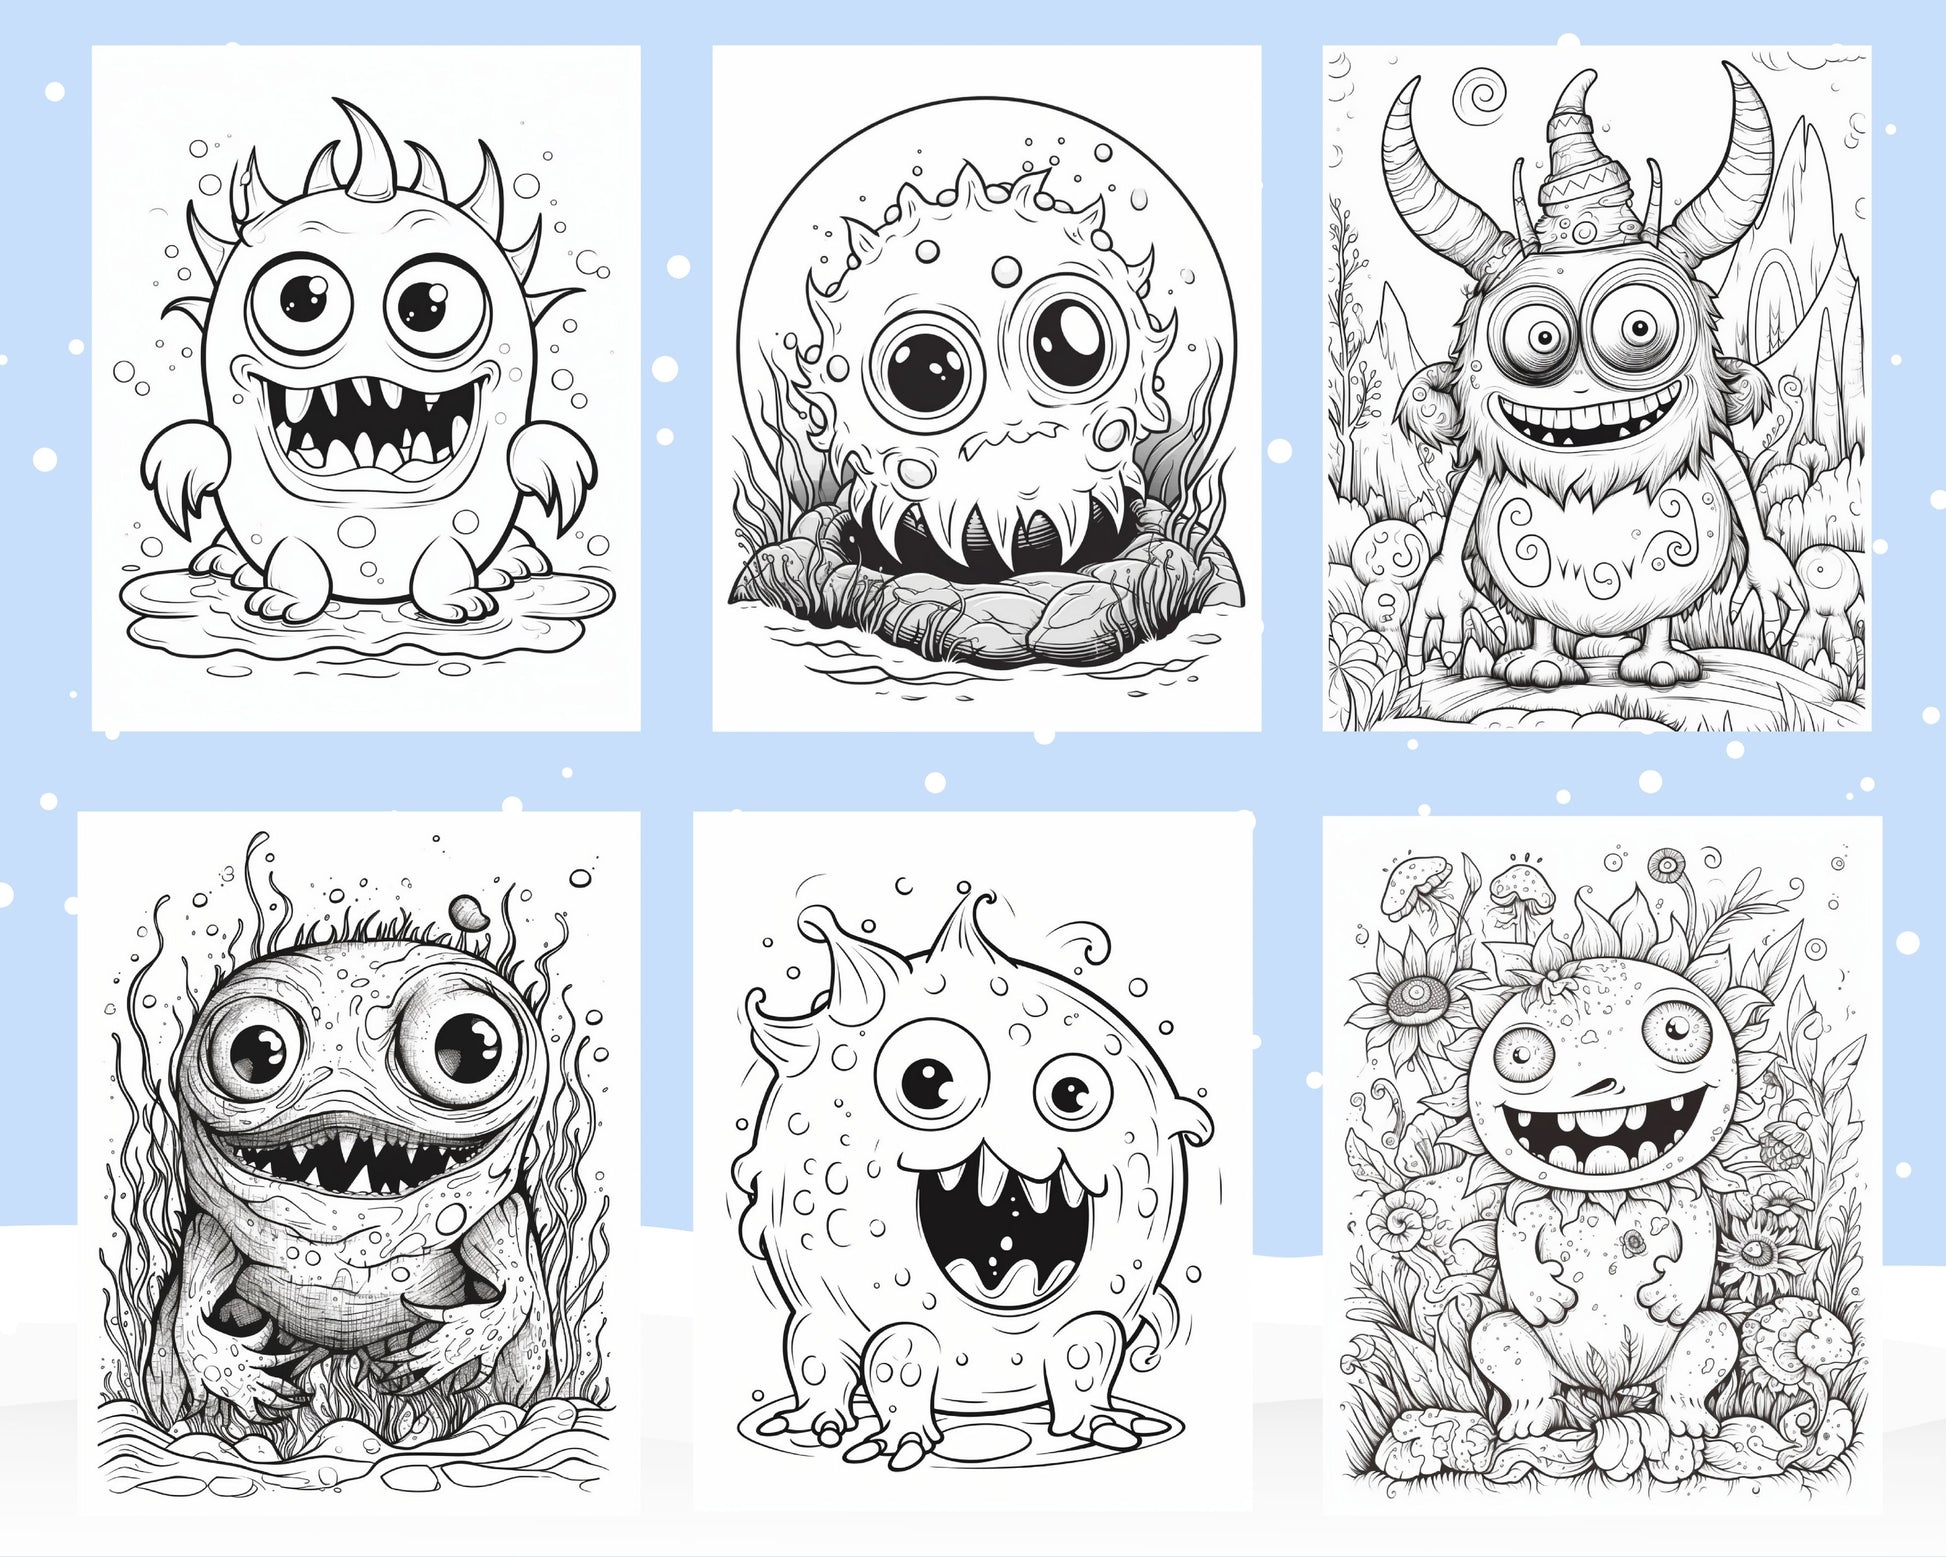 Adorable monster printable coloring pages for kids printable pdf f â coloring